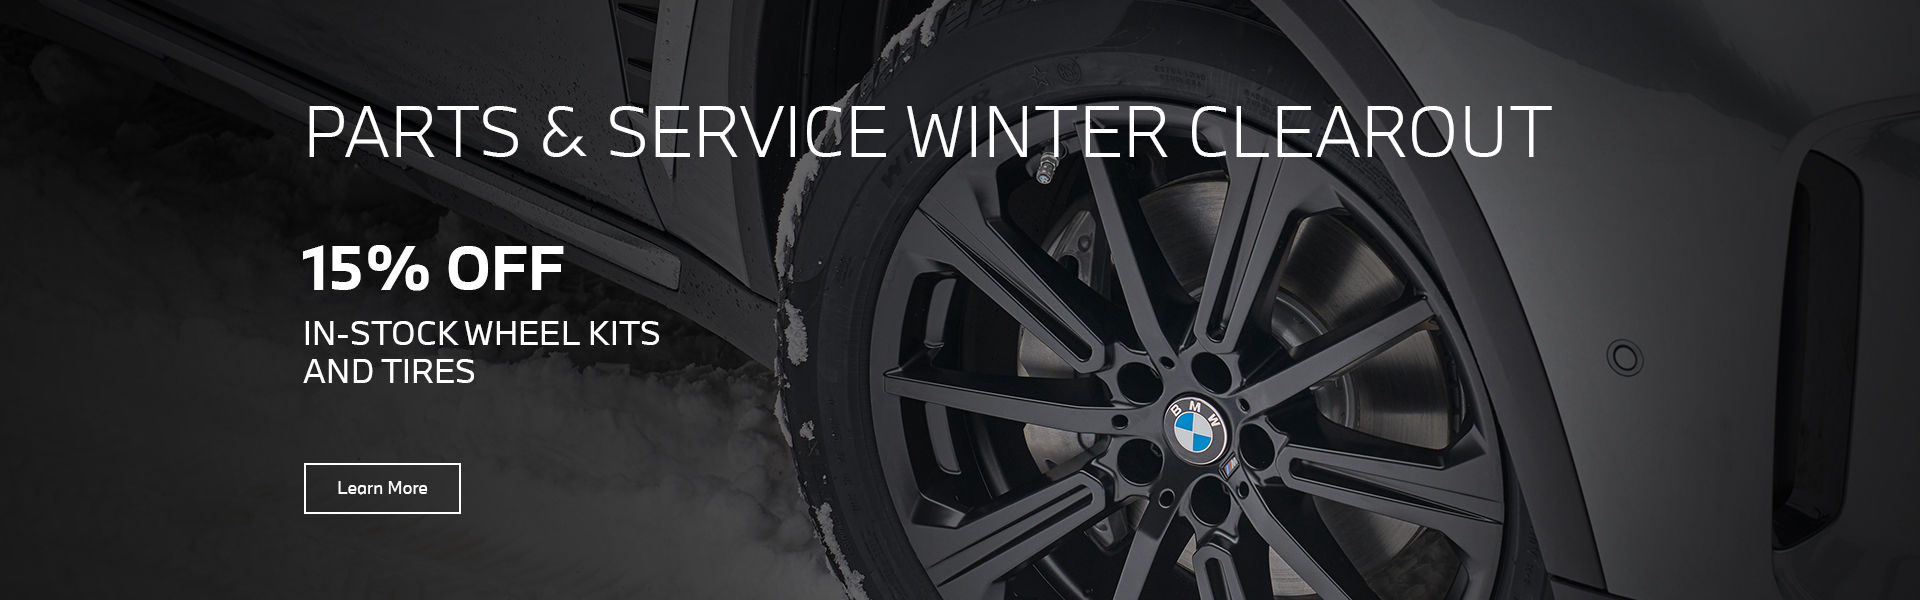 BMW - Winter Clearout